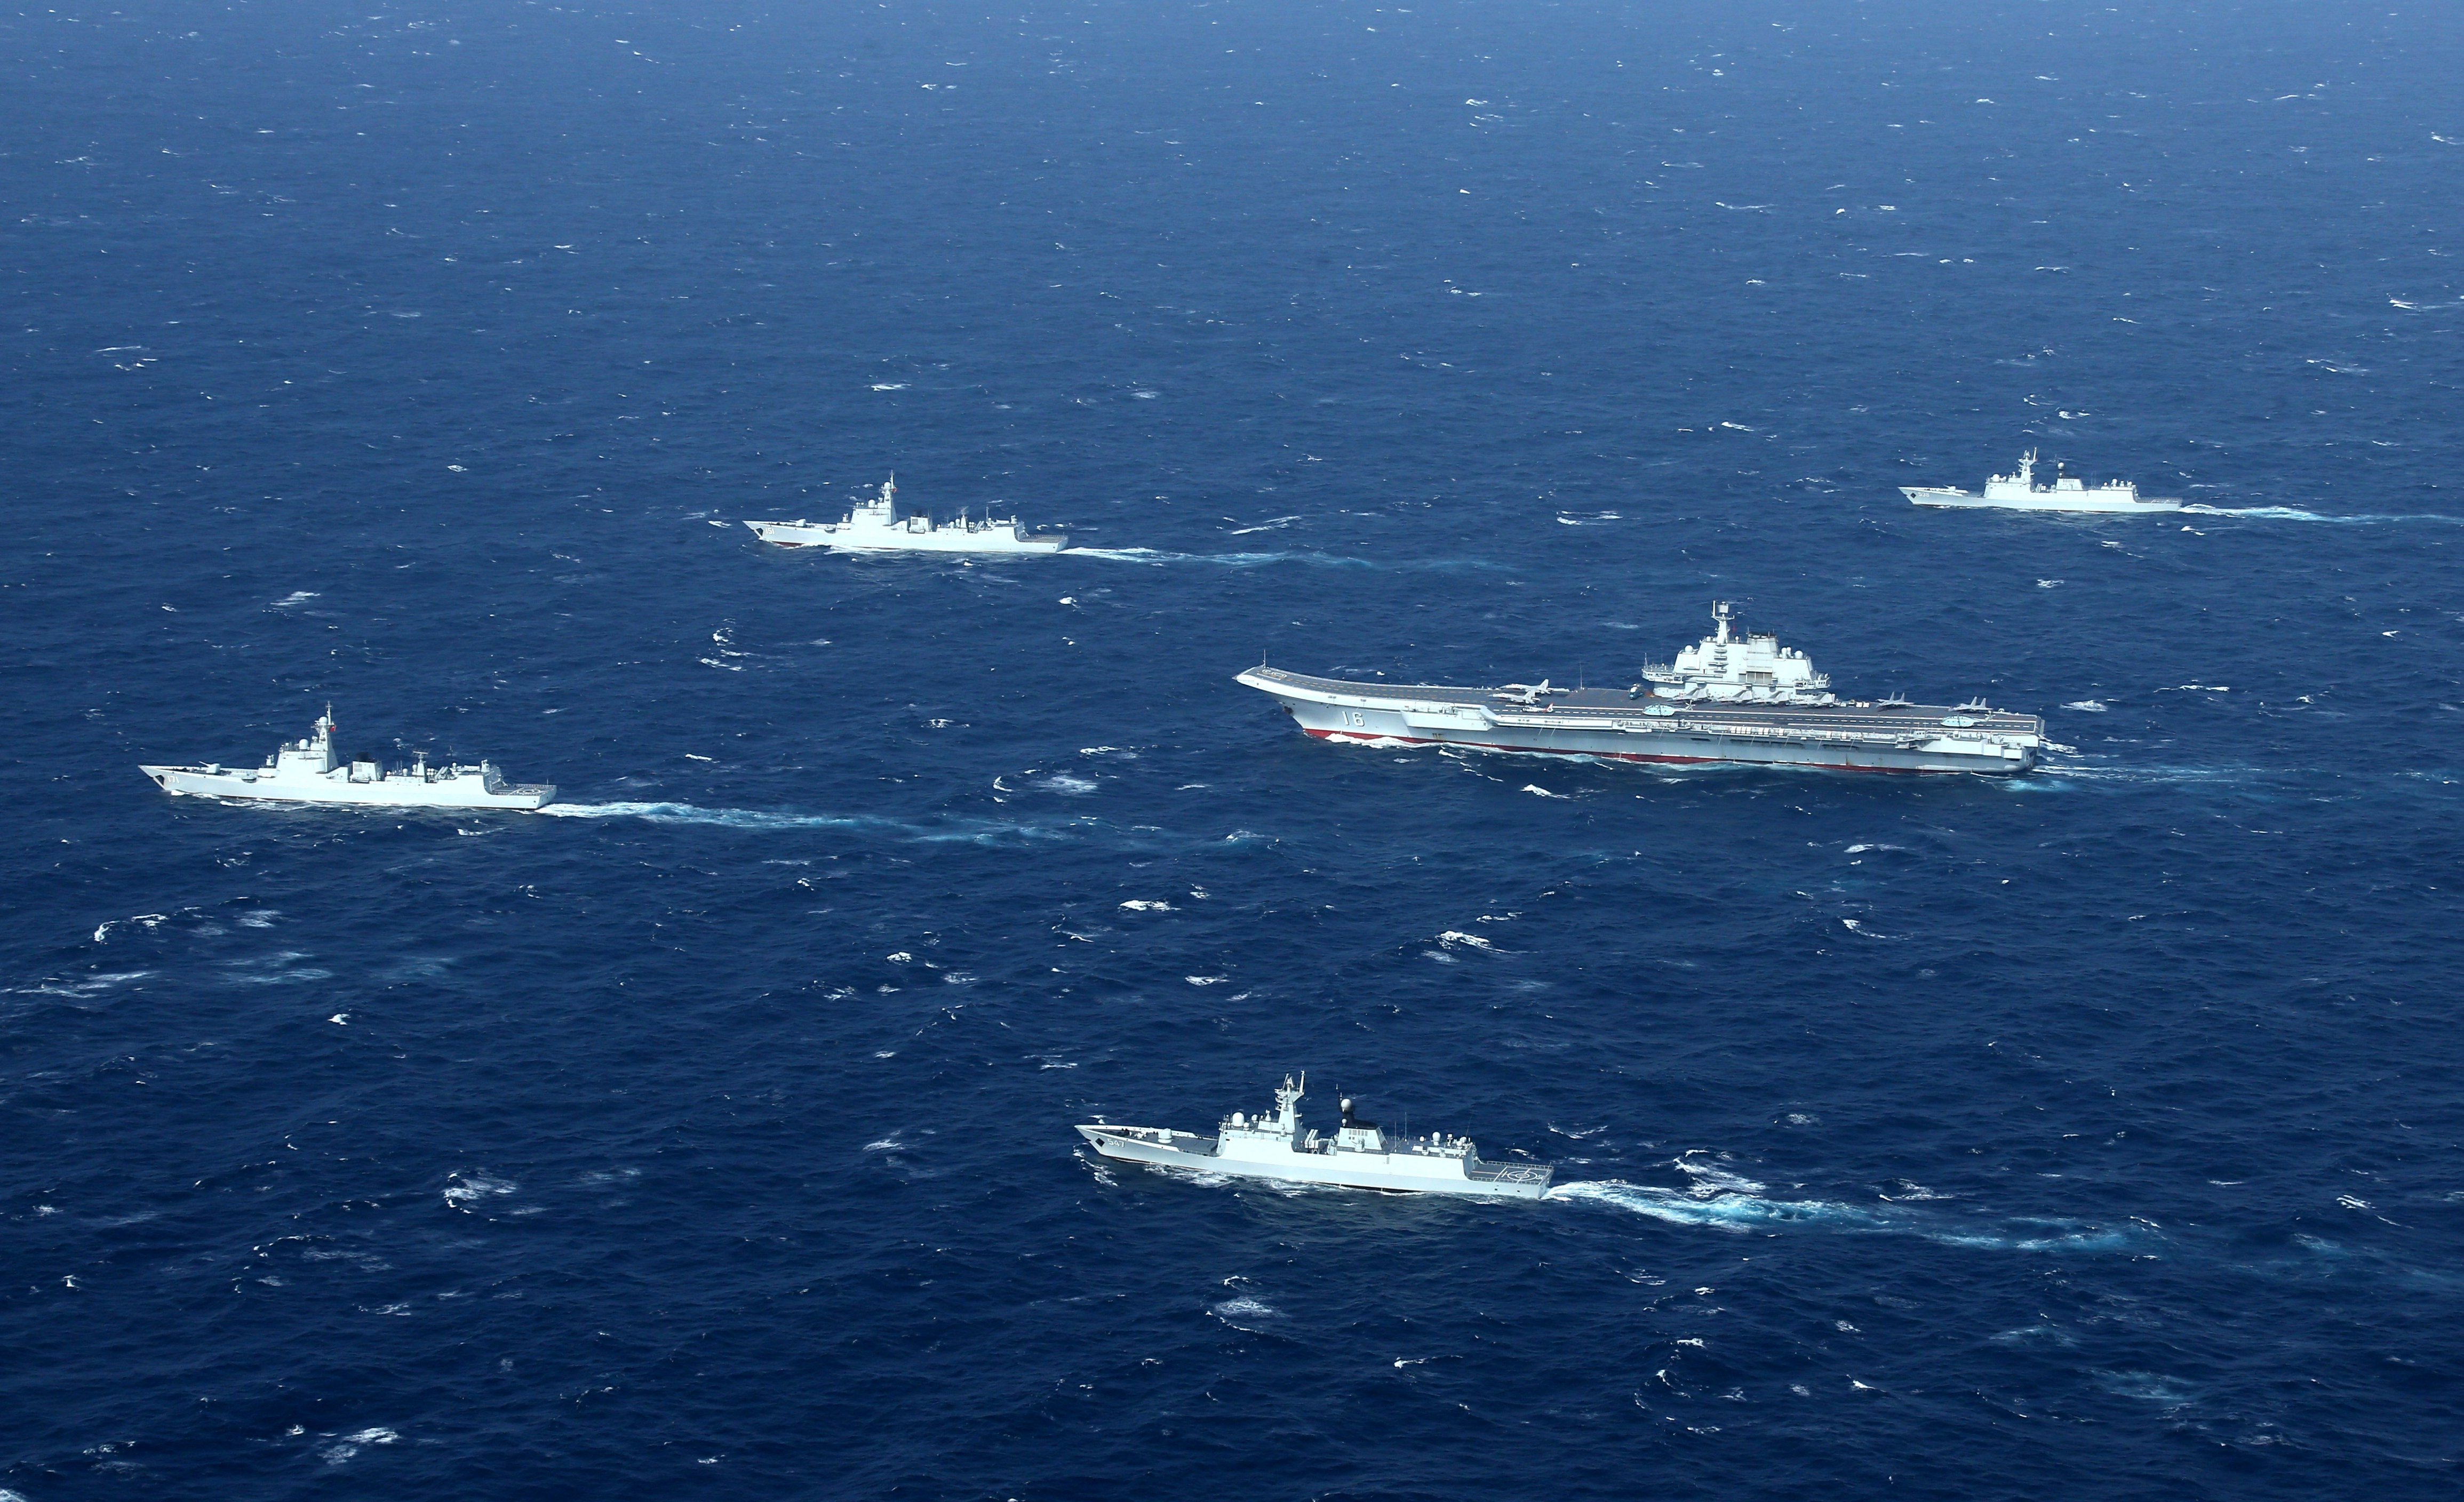 Chinese warships during an exercise in the South China Sea last year. Photo: China News Service